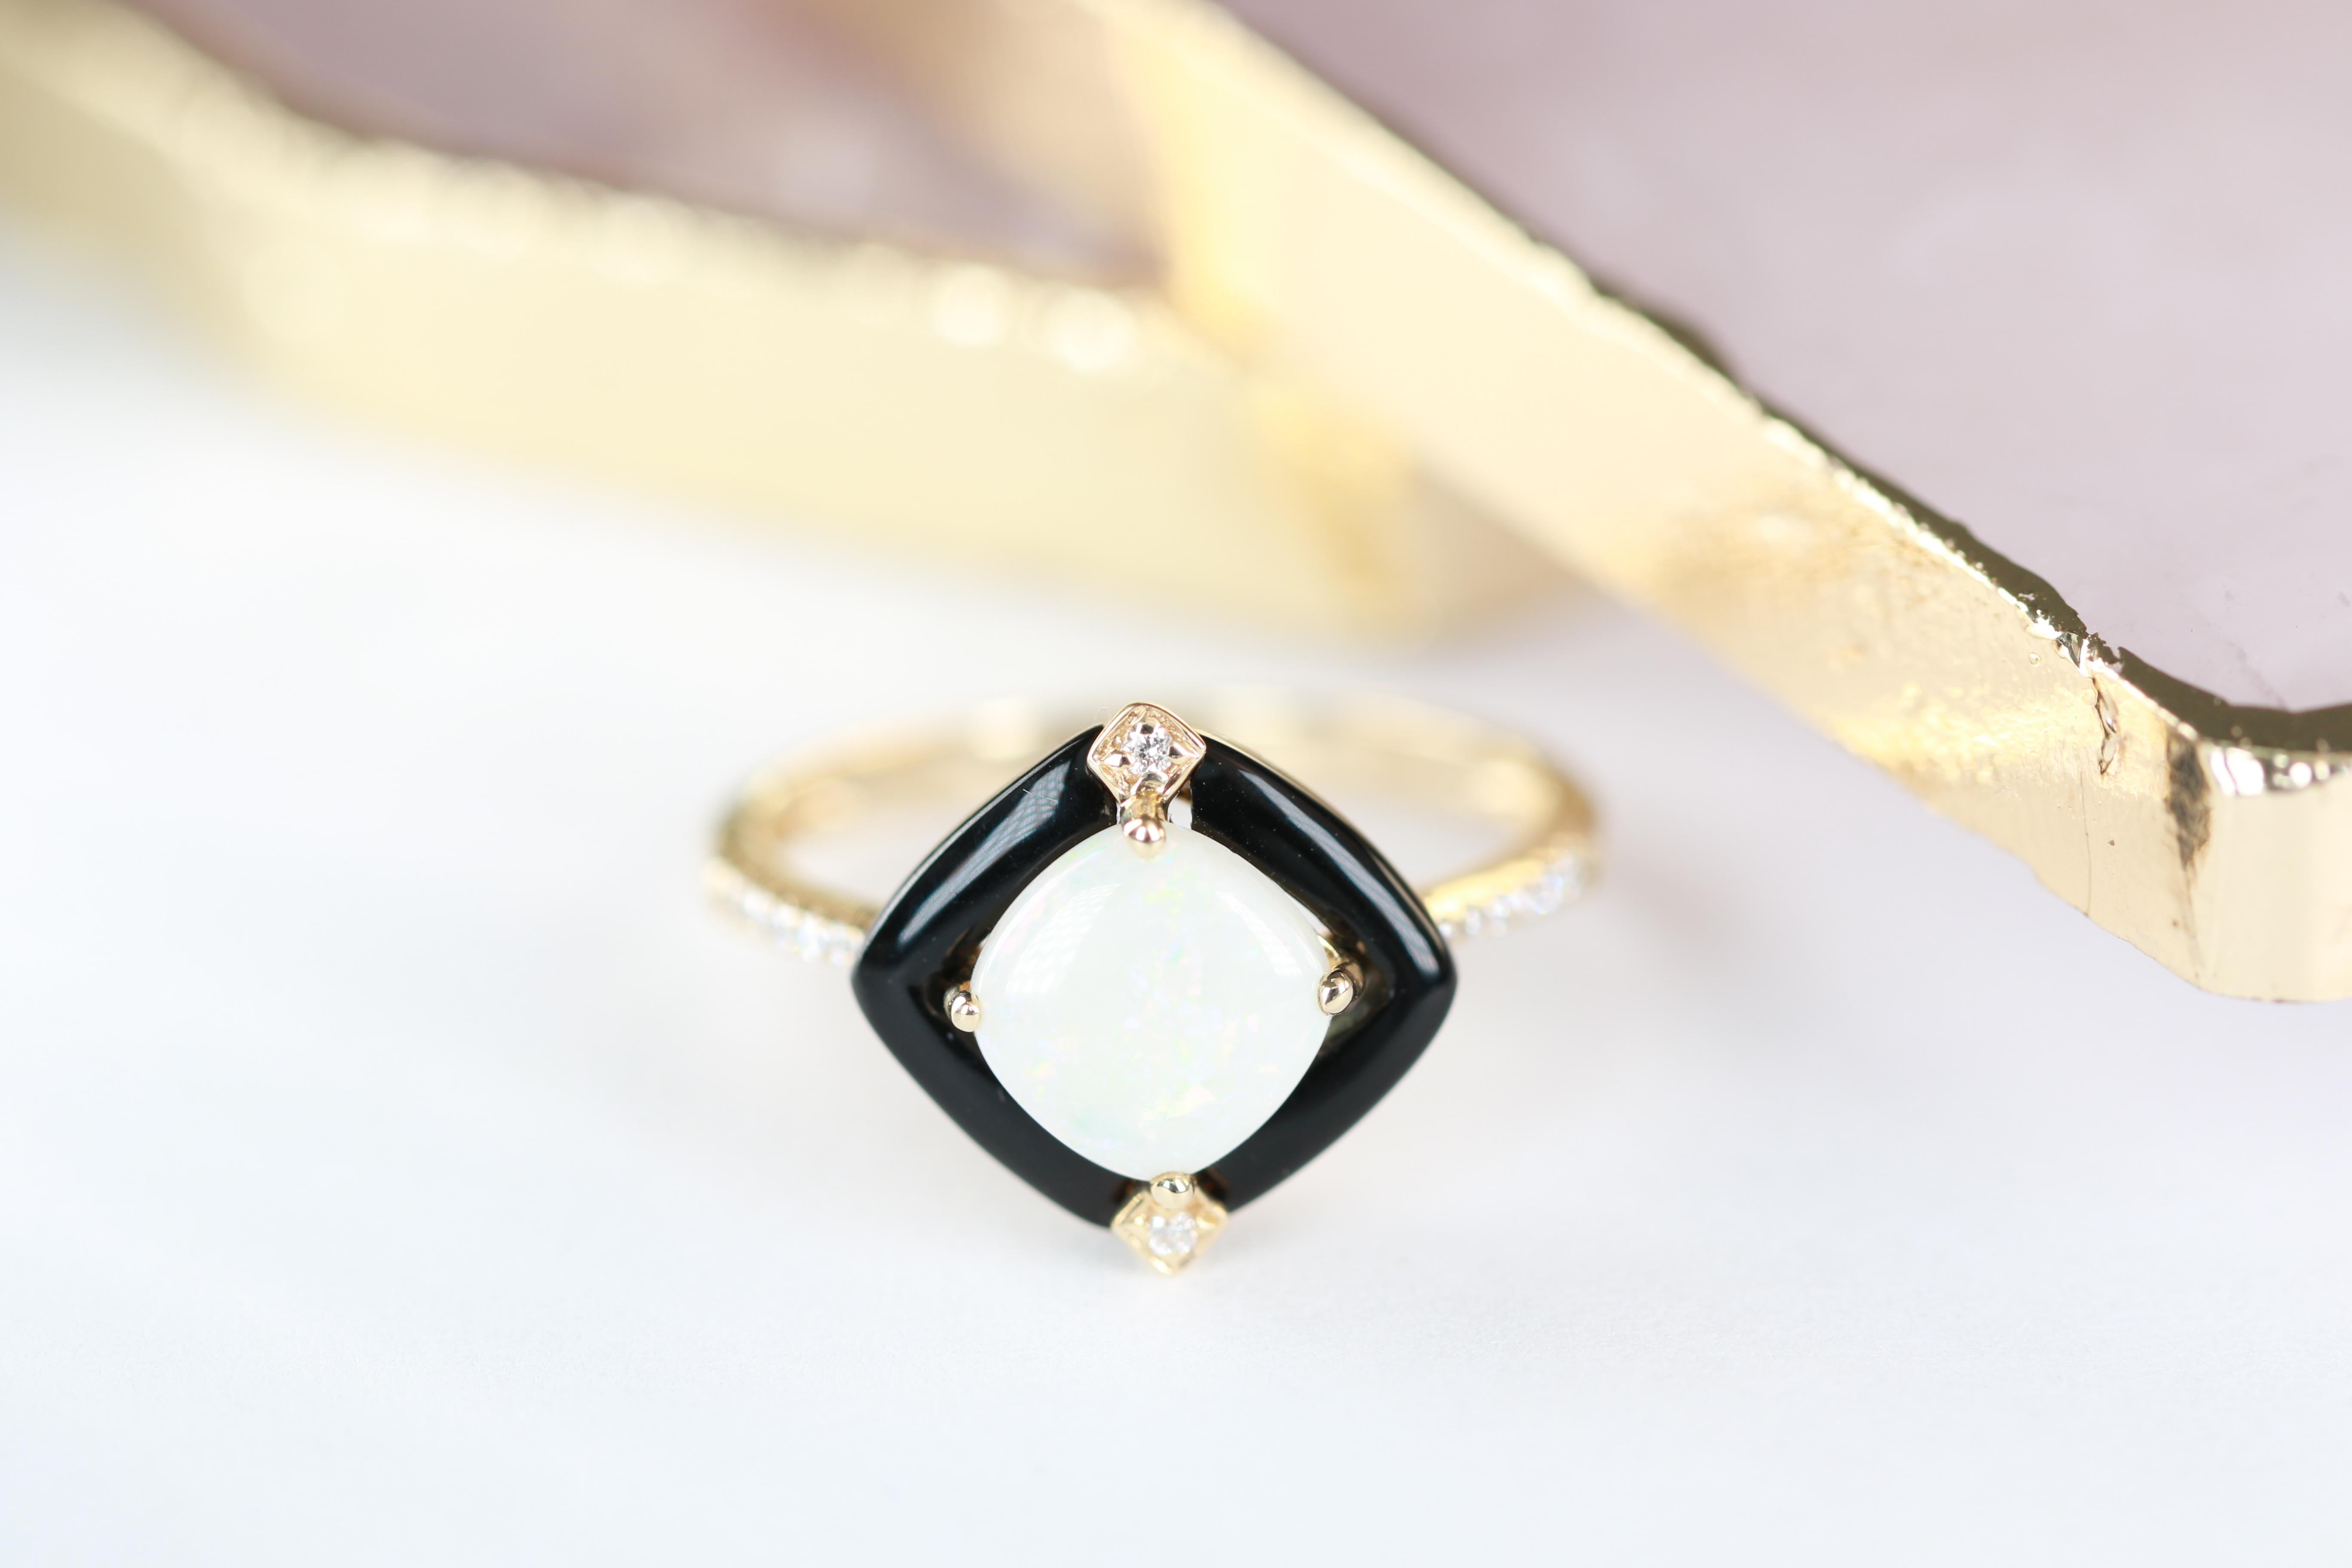 Stunning, timeless and classy eternity Unique Ring. Decorate yourself in luxury with this Gin & Grace Ring. The 14K Yellow Gold jewelry boasts with Round-cab 1 pcs 0.78 carat, Fancy-cut Onyx 2 pcs 1.21 carat, Natural Round-cut white Diamond (14 Pcs)